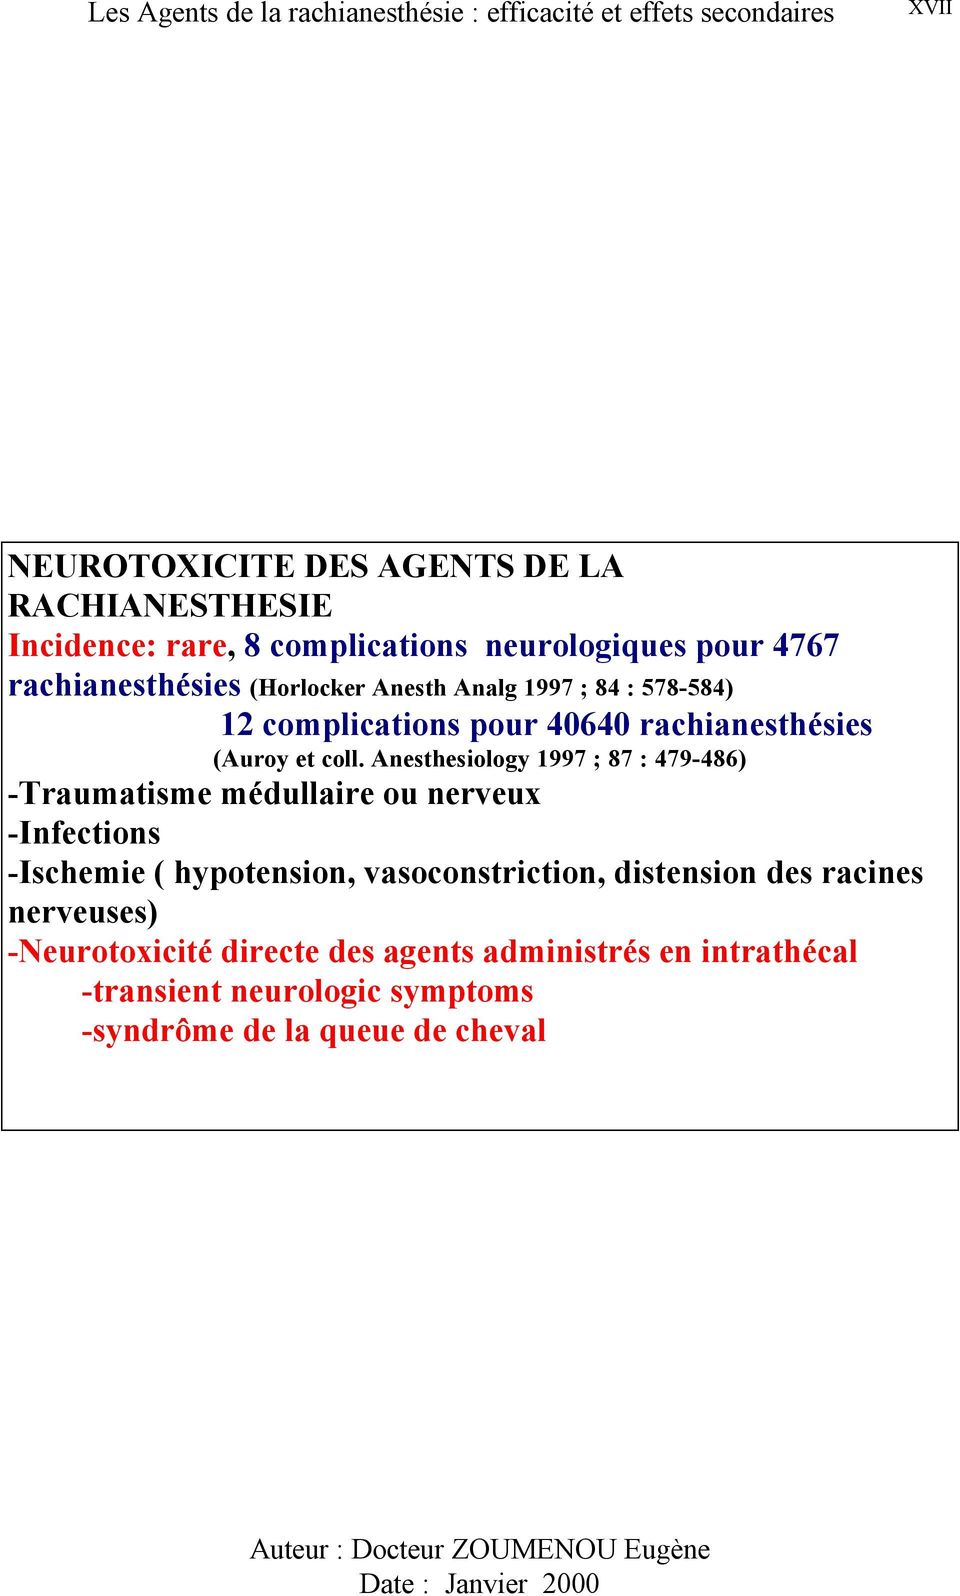 Anesthesiology 1997 ; 87 : 479-486) -Traumatisme médullaire ou nerveux -Infections -Ischemie ( hypotension, vasoconstriction,